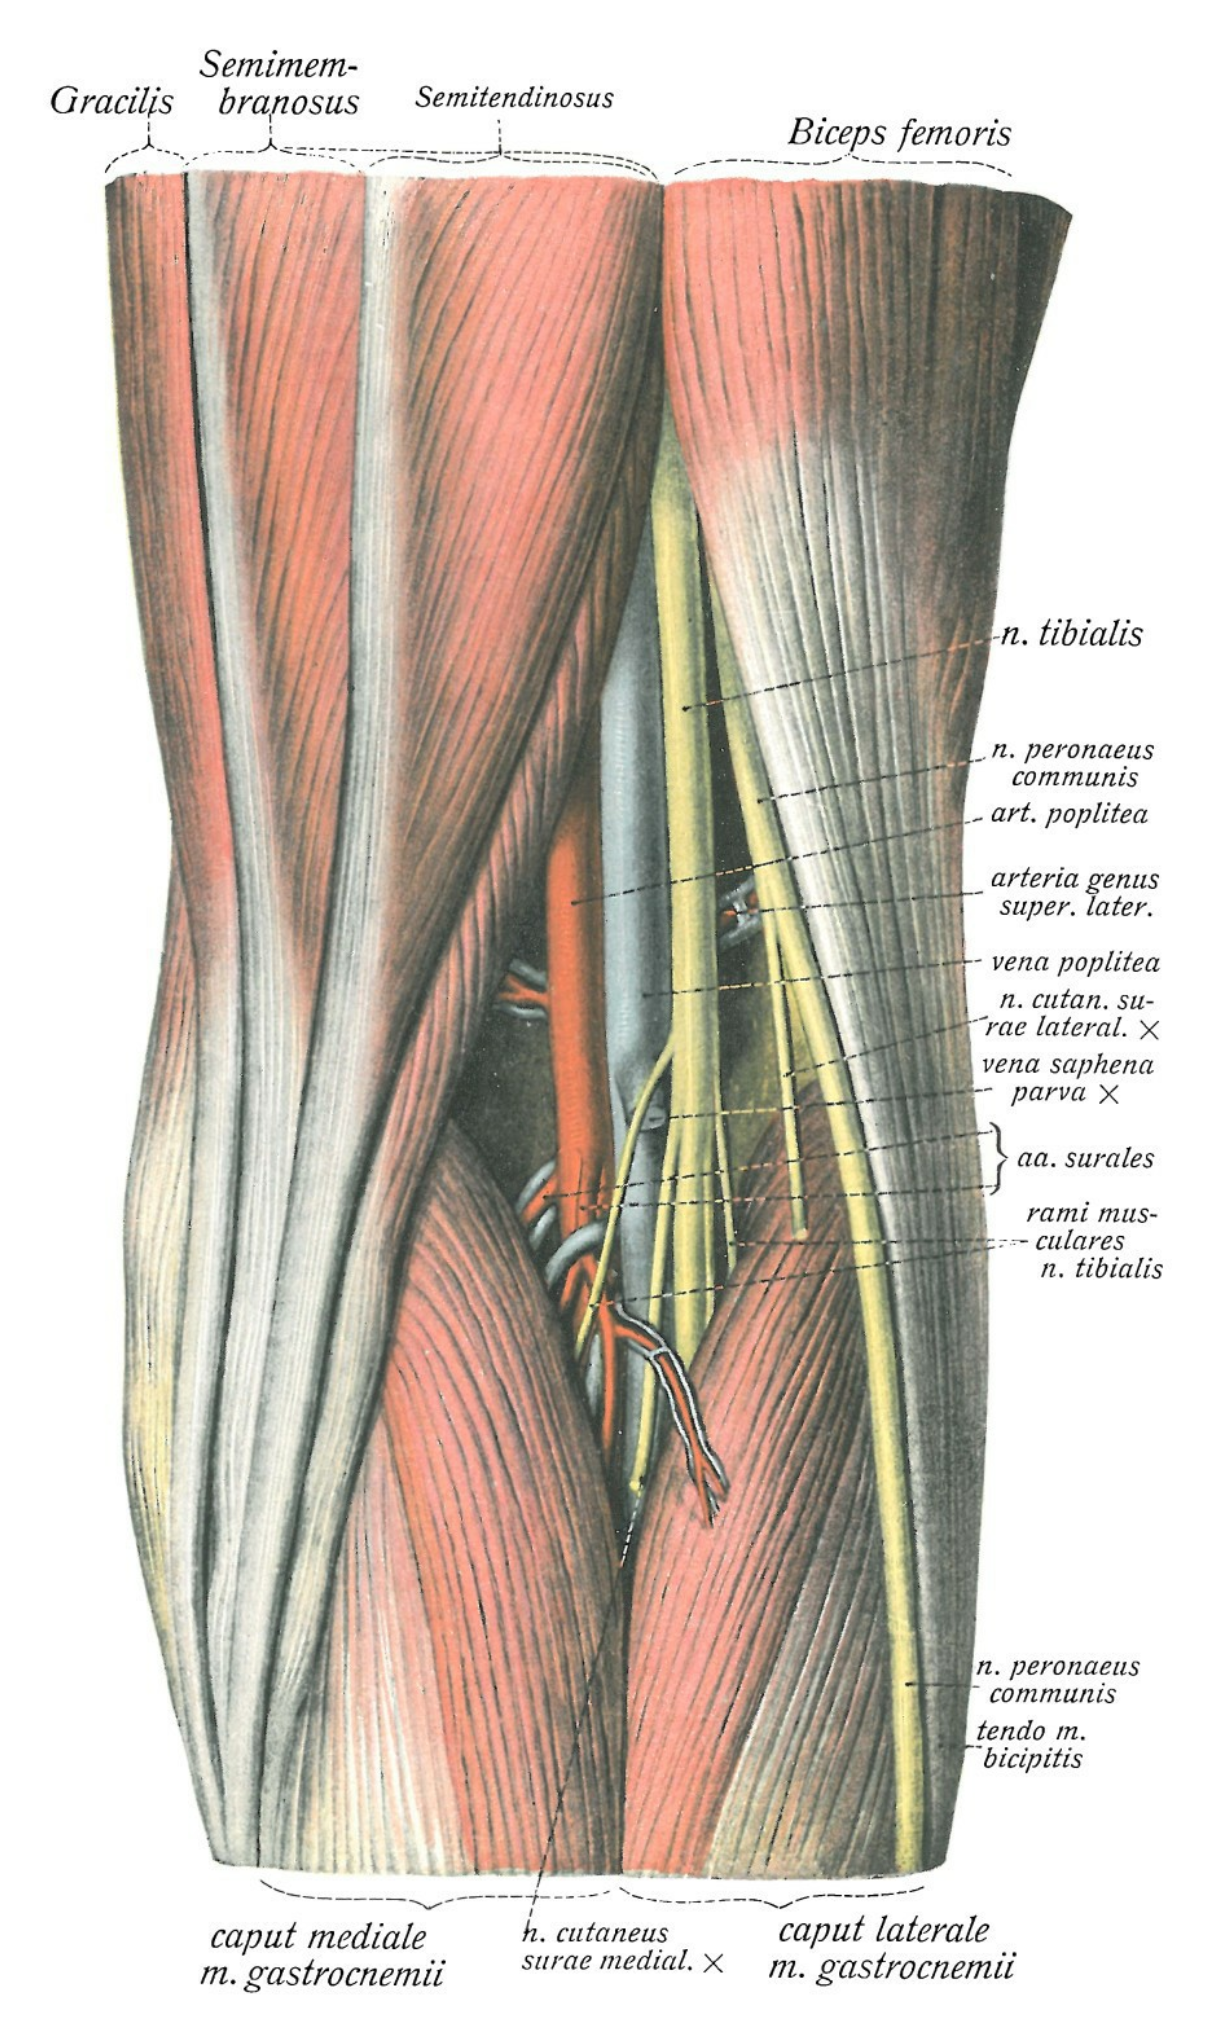  The popliteal vein begins behind the knee as the confluence of the deep calf veins. In the popliteal fossa, it lies superficial to the popliteal artery and ascends through the adductor canal into the thigh, becoming the femoral vein.  